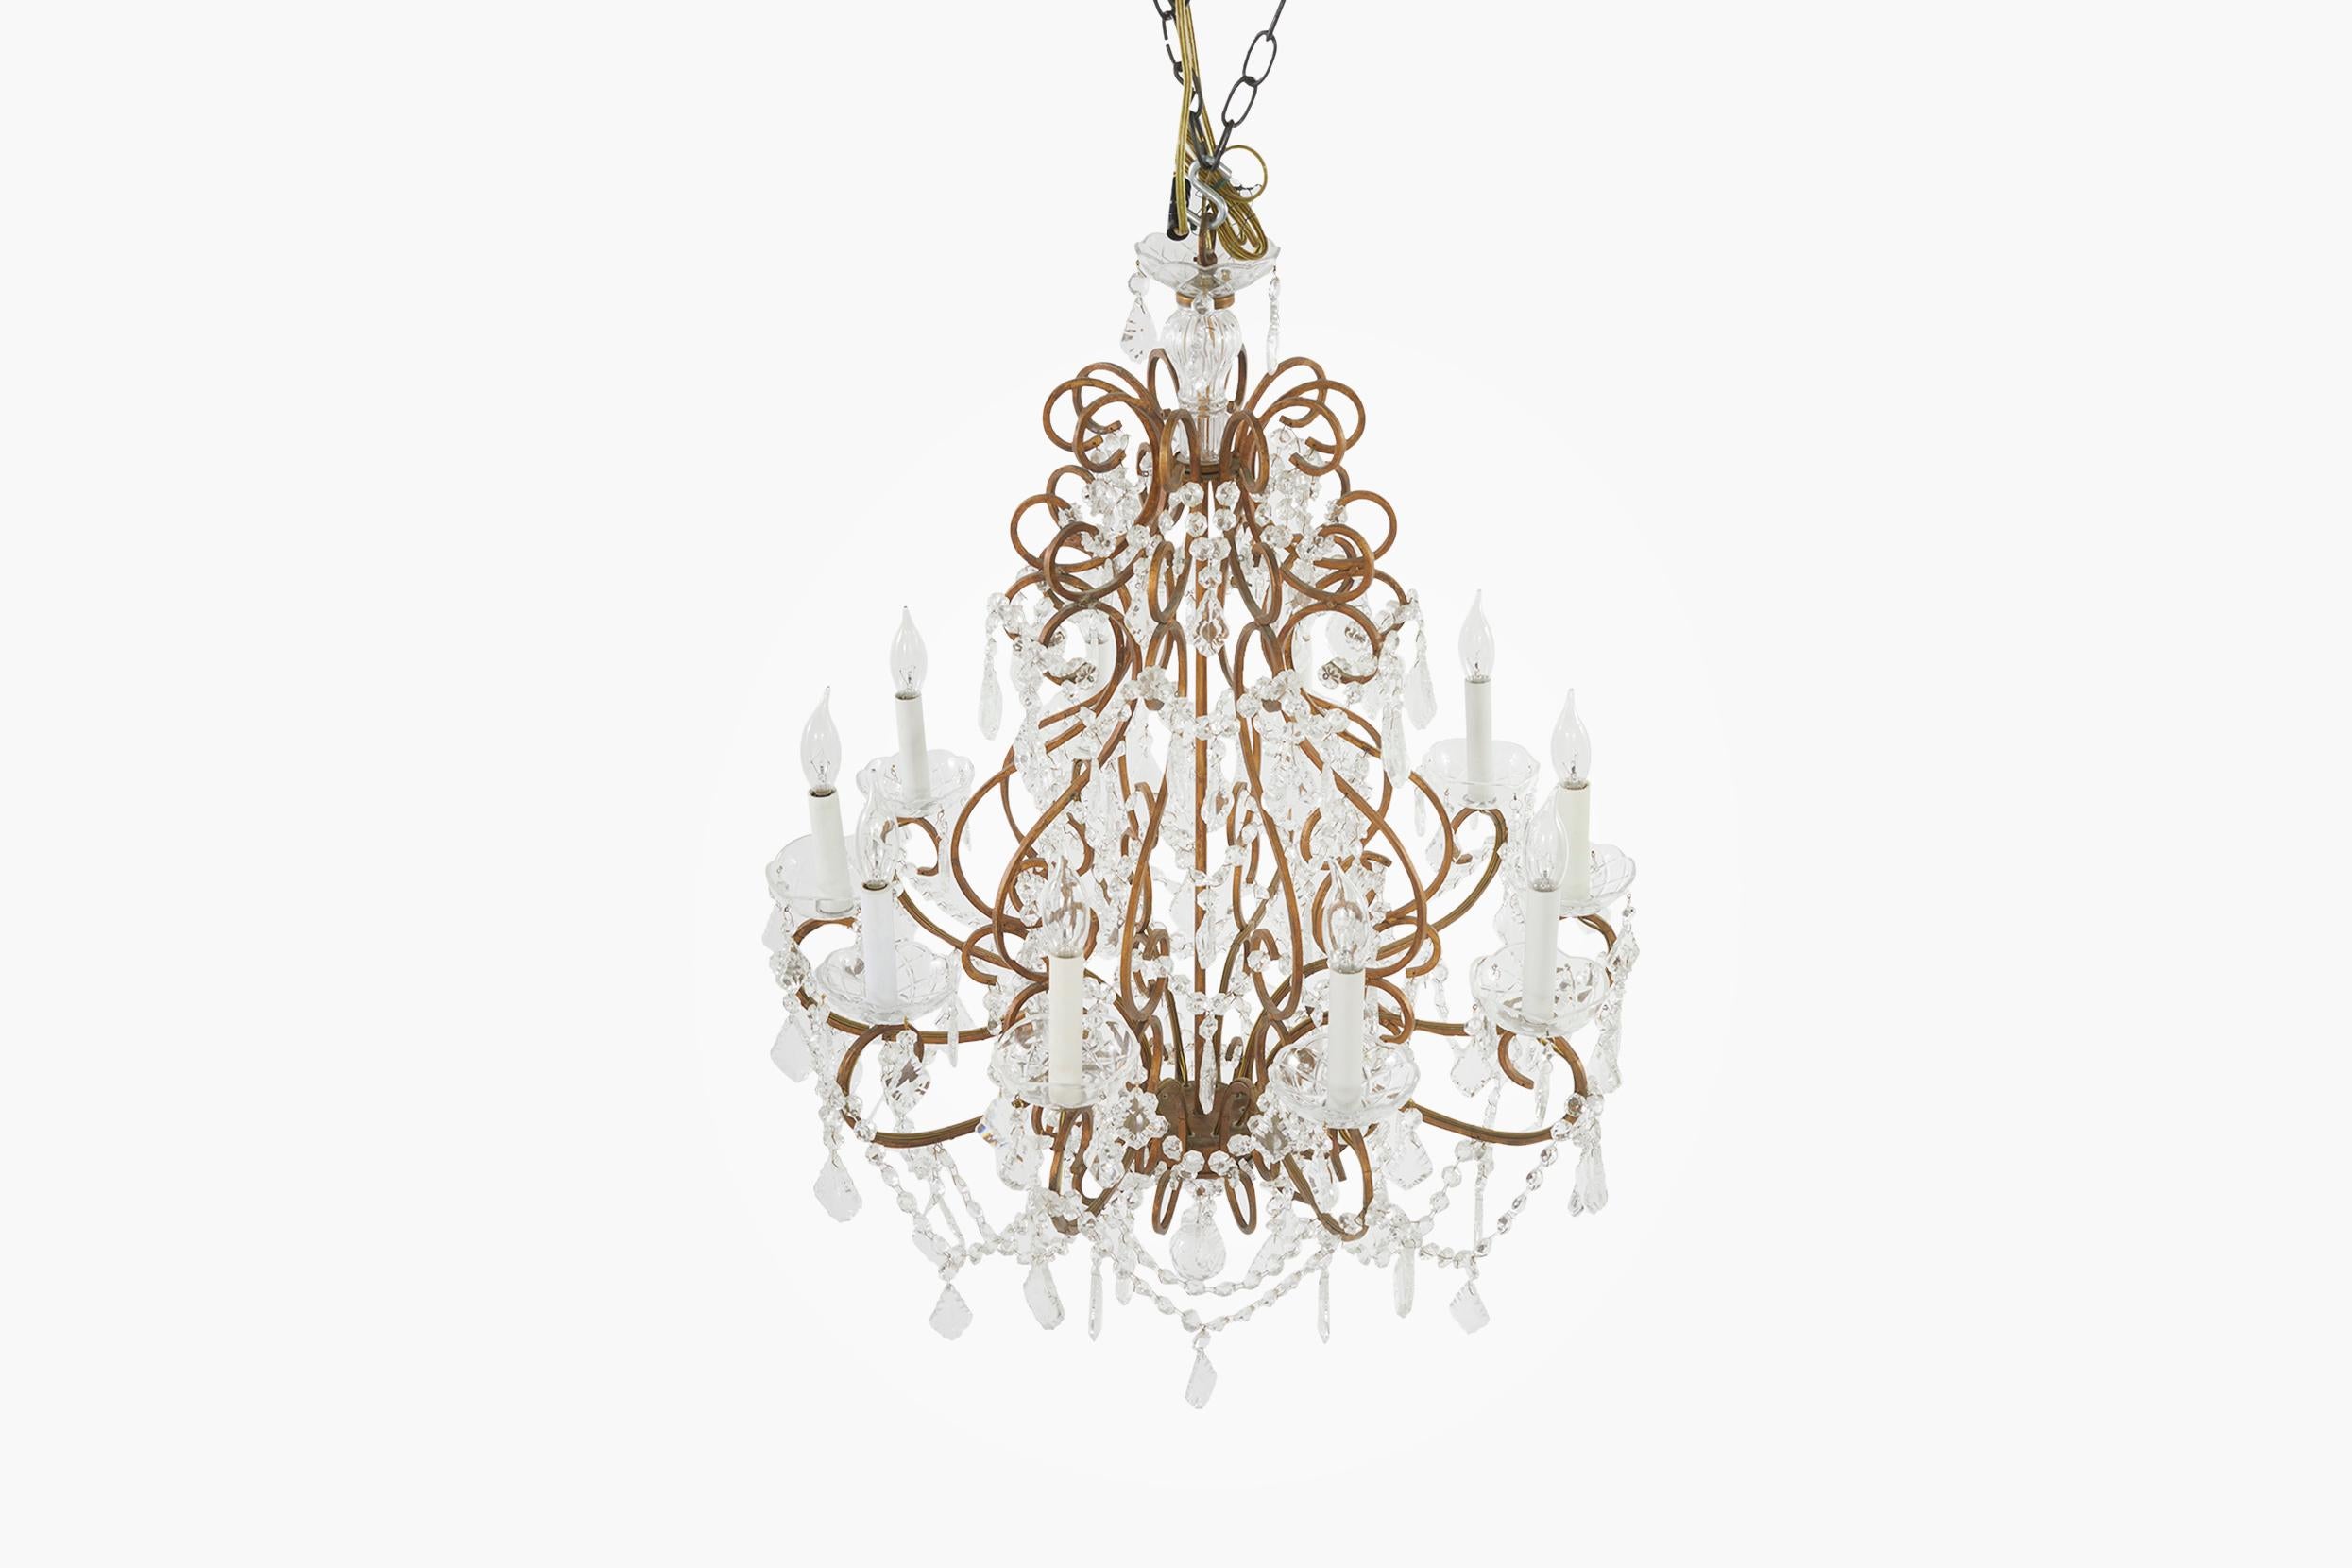 Late 19th century French Rococo style cut crystal / brass frame ten-light hanging chandelier. The chandelier is in great working condition. Rewired for US used. The chandelier stands about 36 inches long x 28 inches diameter without the hanging